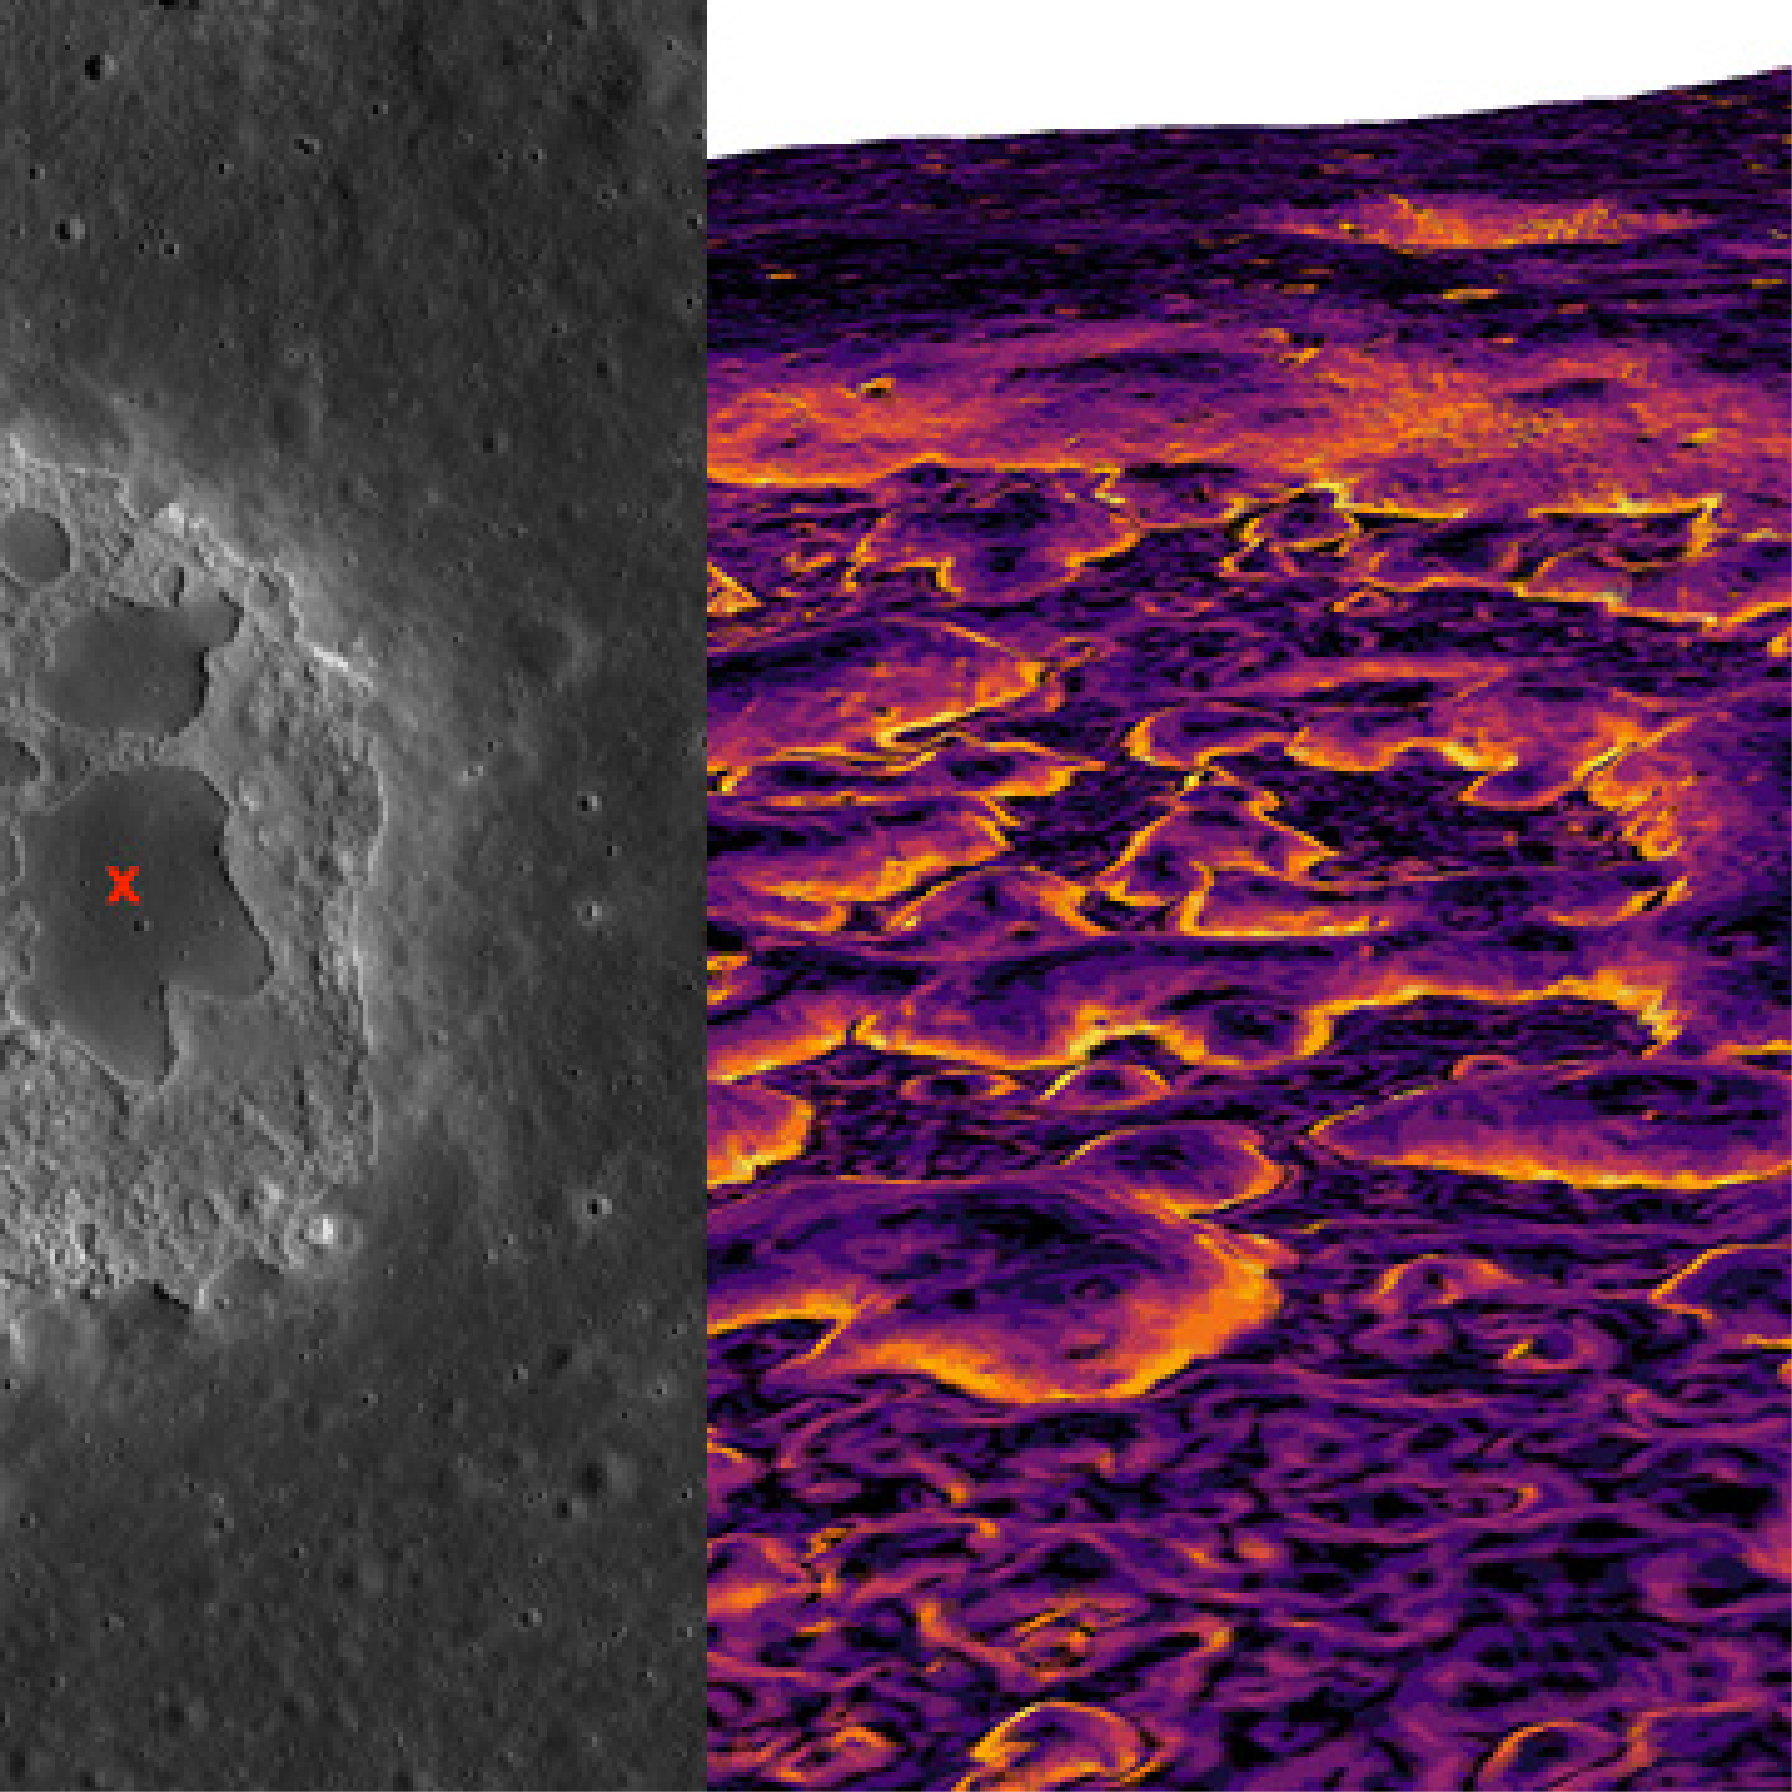 Images of the surface of the moon in greyscale and color